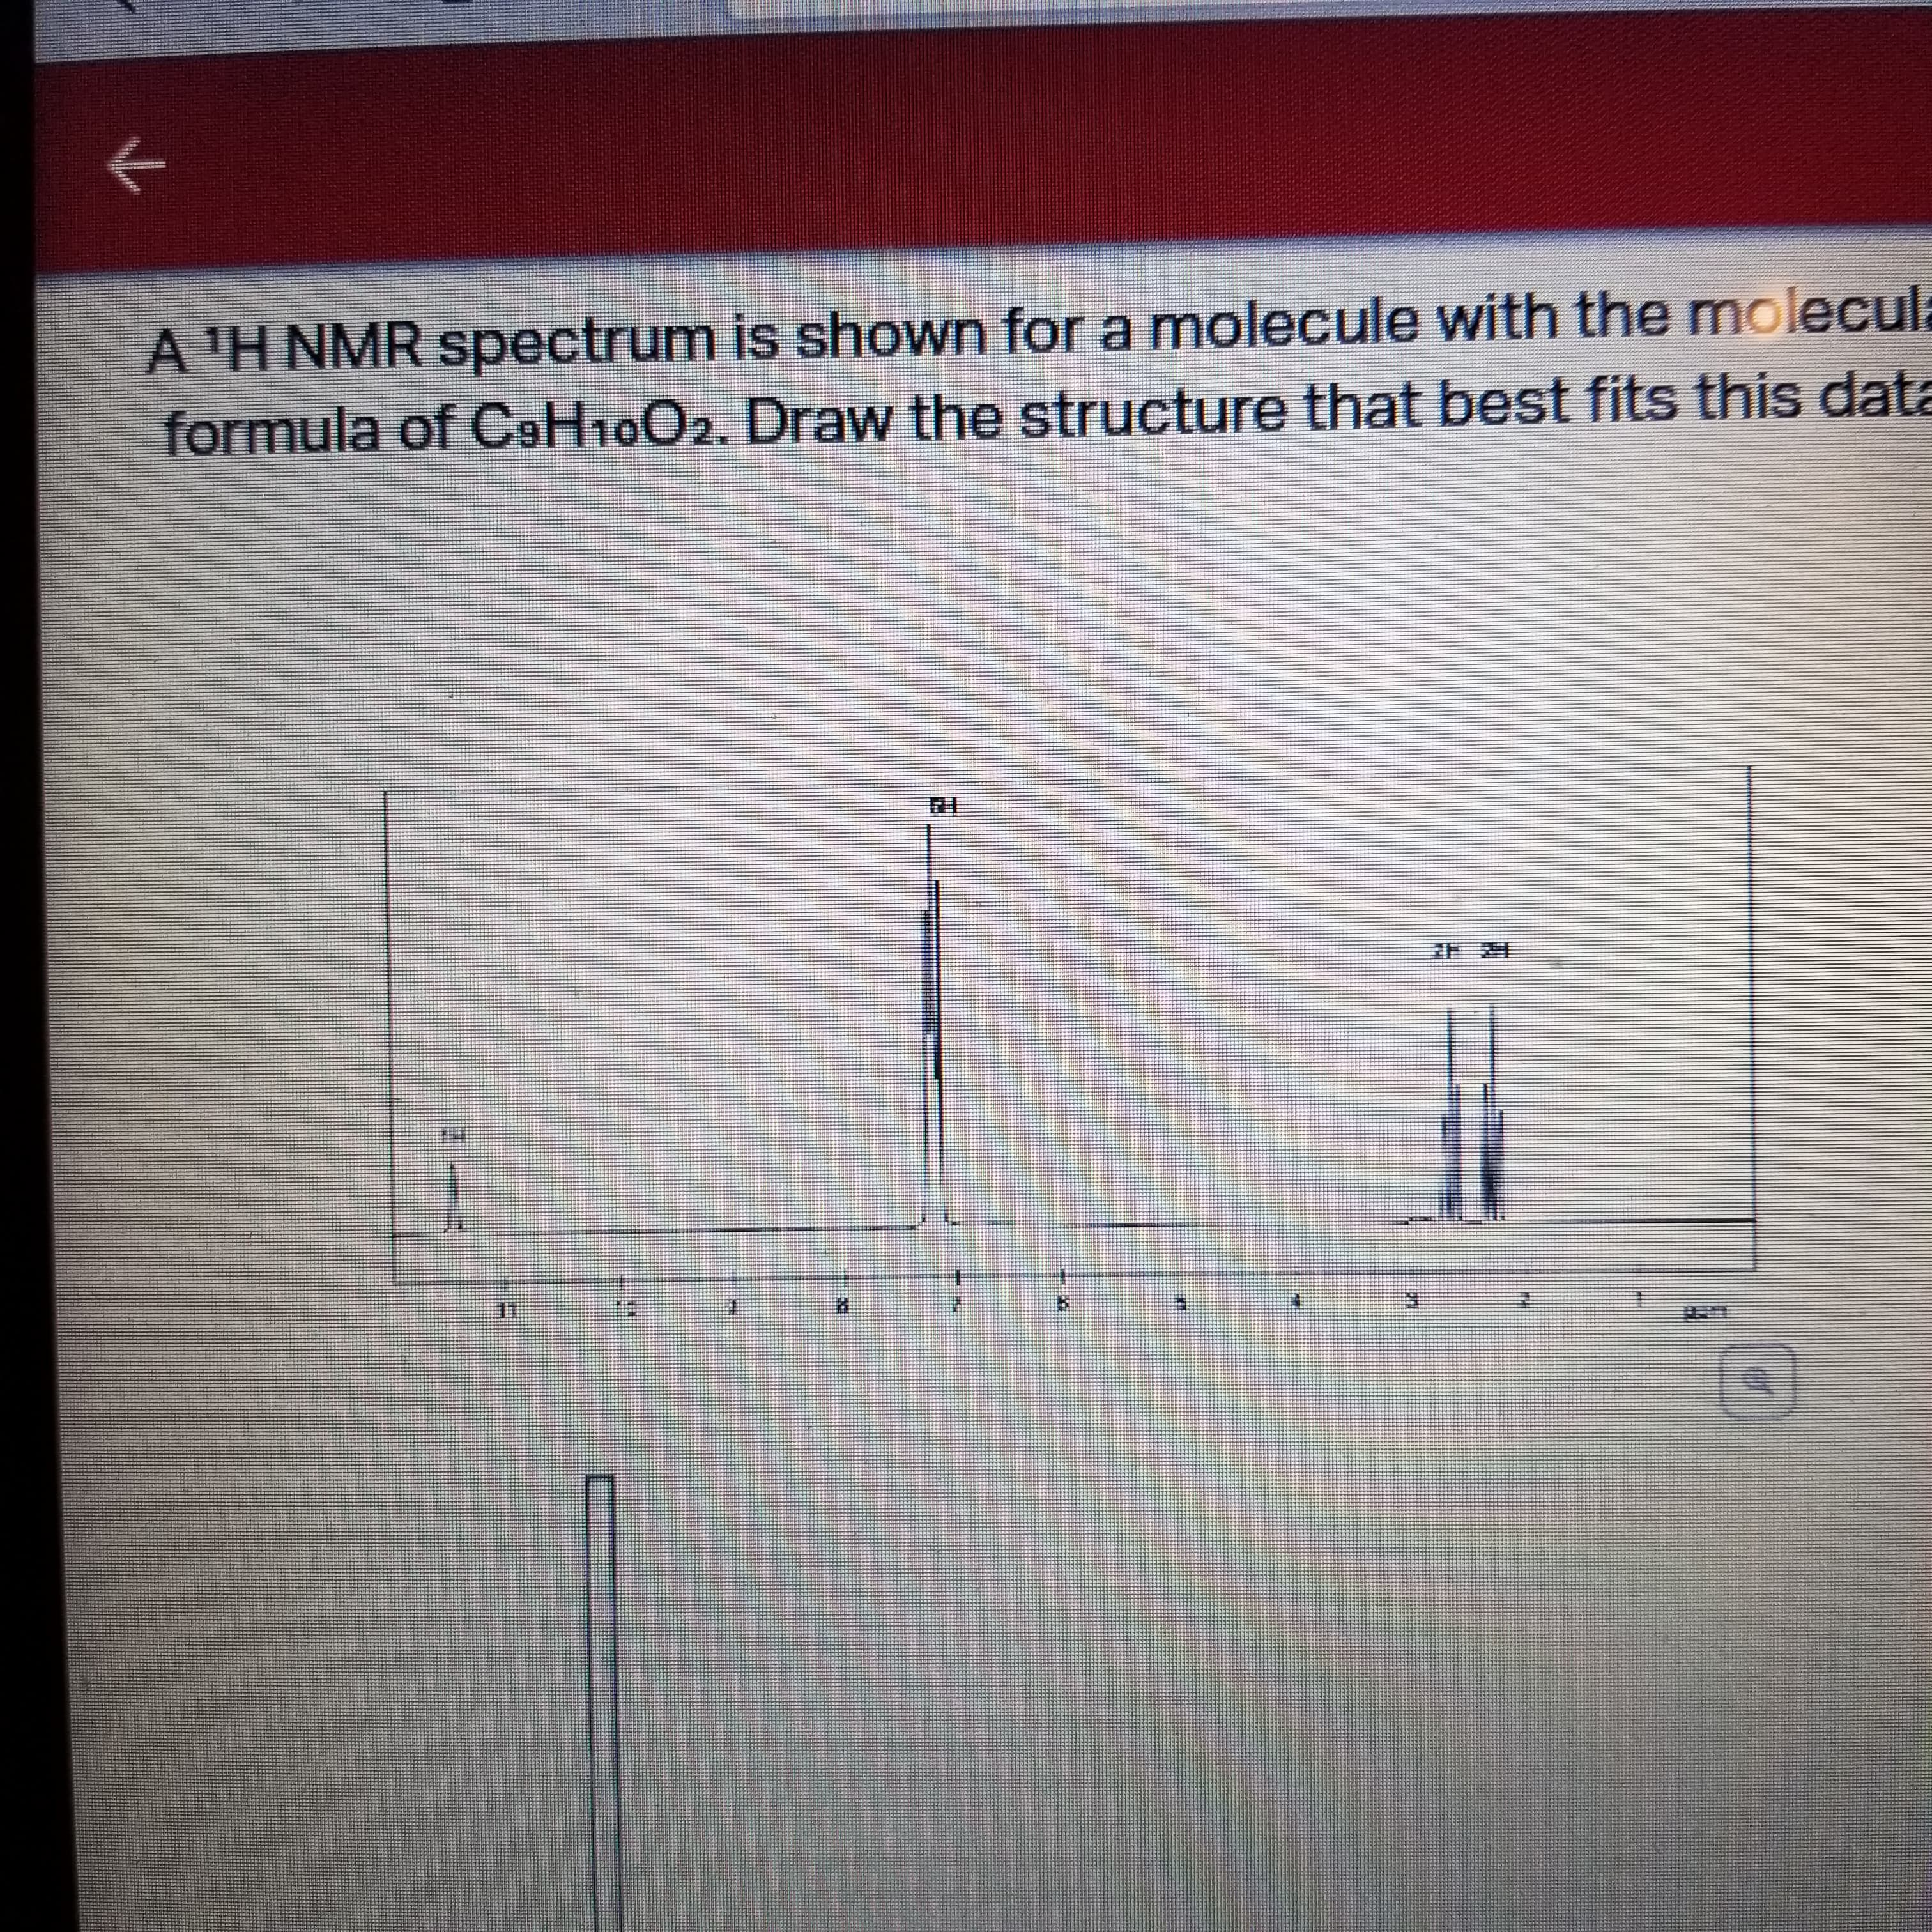 A 'H NMR spectrum is shown for a molecule with the molecula
formula of C9H10O2. Draw the structure that best fits this data
